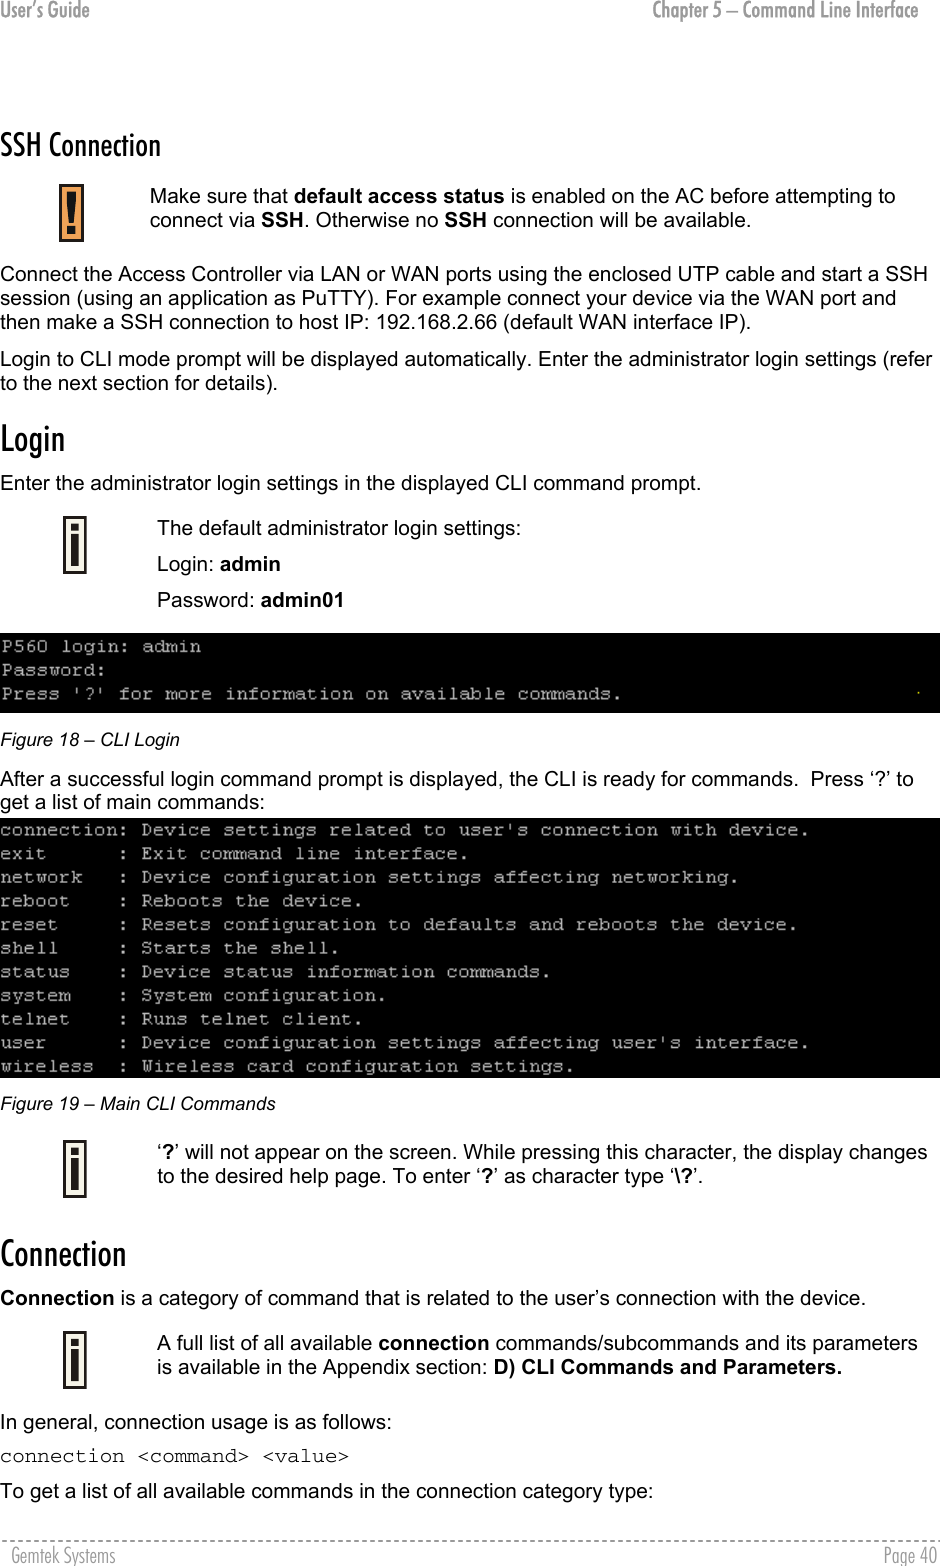 User’s Guide  Chapter 5 – Command Line Interface  SSH Connection  Make sure that default access status is enabled on the AC before attempting to connect via SSH. Otherwise no SSH connection will be available. Connect the Access Controller via LAN or WAN ports using the enclosed UTP cable and start a SSH session (using an application as PuTTY). For example connect your device via the WAN port and then make a SSH connection to host IP: 192.168.2.66 (default WAN interface IP). Login to CLI mode prompt will be displayed automatically. Enter the administrator login settings (refer to the next section for details). Login  Enter the administrator login settings in the displayed CLI command prompt.  The default administrator login settings: Login: admin Password: admin01  Figure 18 – CLI Login After a successful login command prompt is displayed, the CLI is ready for commands.  Press ‘?’ to get a list of main commands:  Figure 19 – Main CLI Commands  ‘?’ will not appear on the screen. While pressing this character, the display changes to the desired help page. To enter ‘?’ as character type ‘\?’. Connection  Connection is a category of command that is related to the user’s connection with the device.  A full list of all available connection commands/subcommands and its parameters is available in the Appendix section: D) CLI Commands and Parameters. In general, connection usage is as follows:  connection &lt;command&gt; &lt;value&gt; To get a list of all available commands in the connection category type:  Gemtek Systems    Page 40  